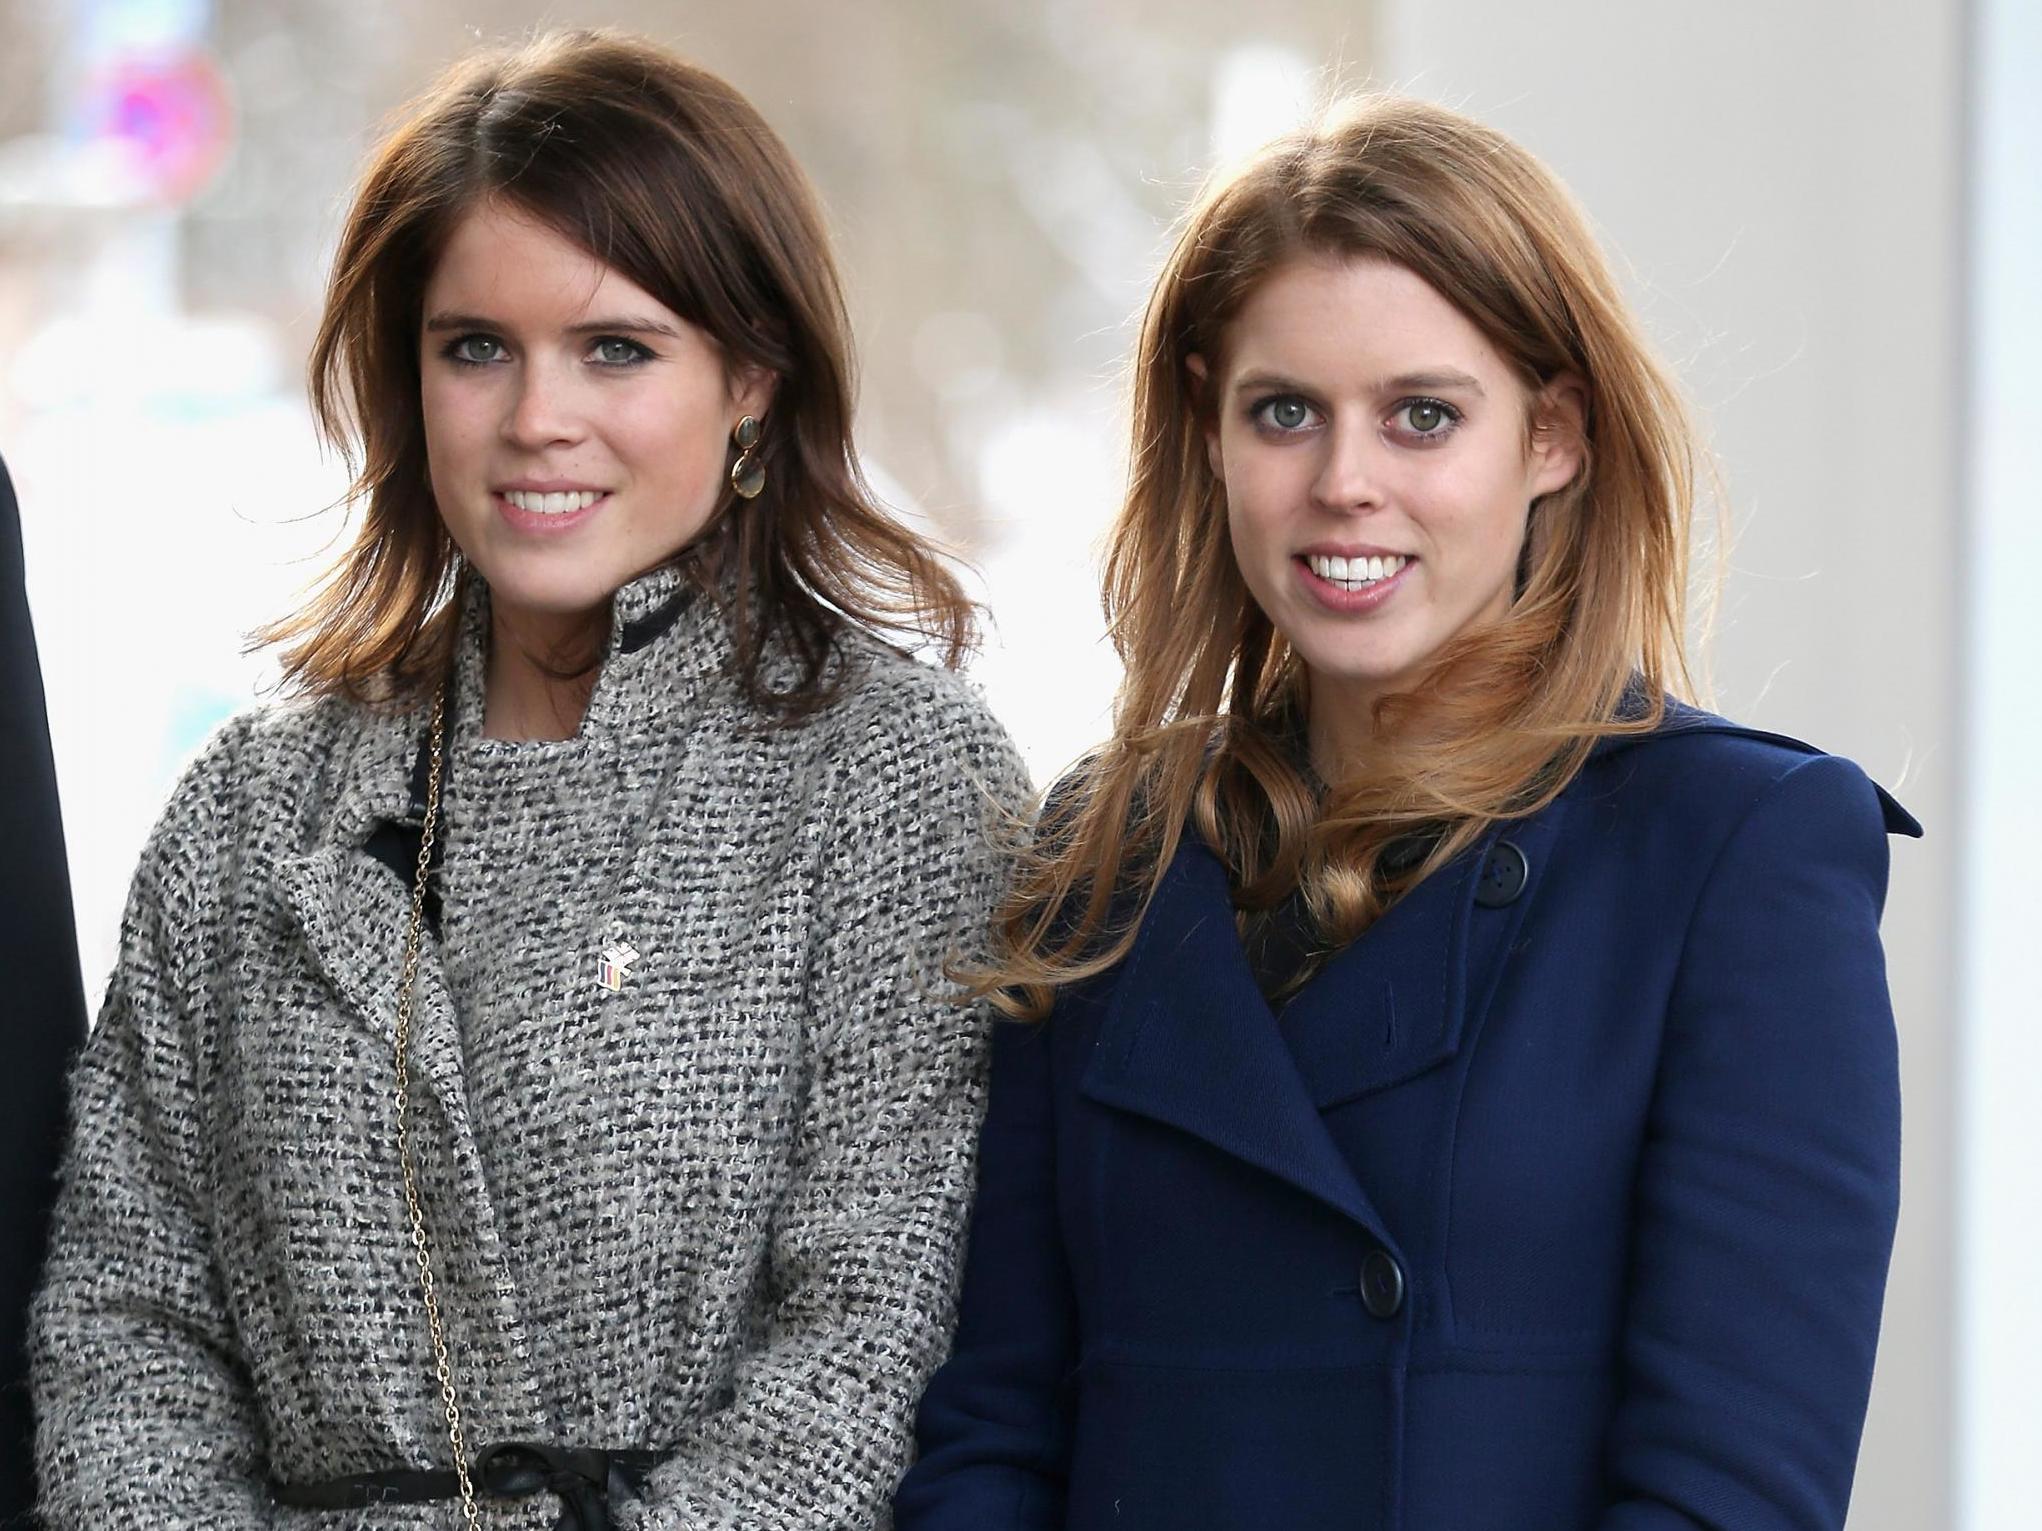 Princesses Beatrice And Eugenie Talk To Young Cancer Patients About 